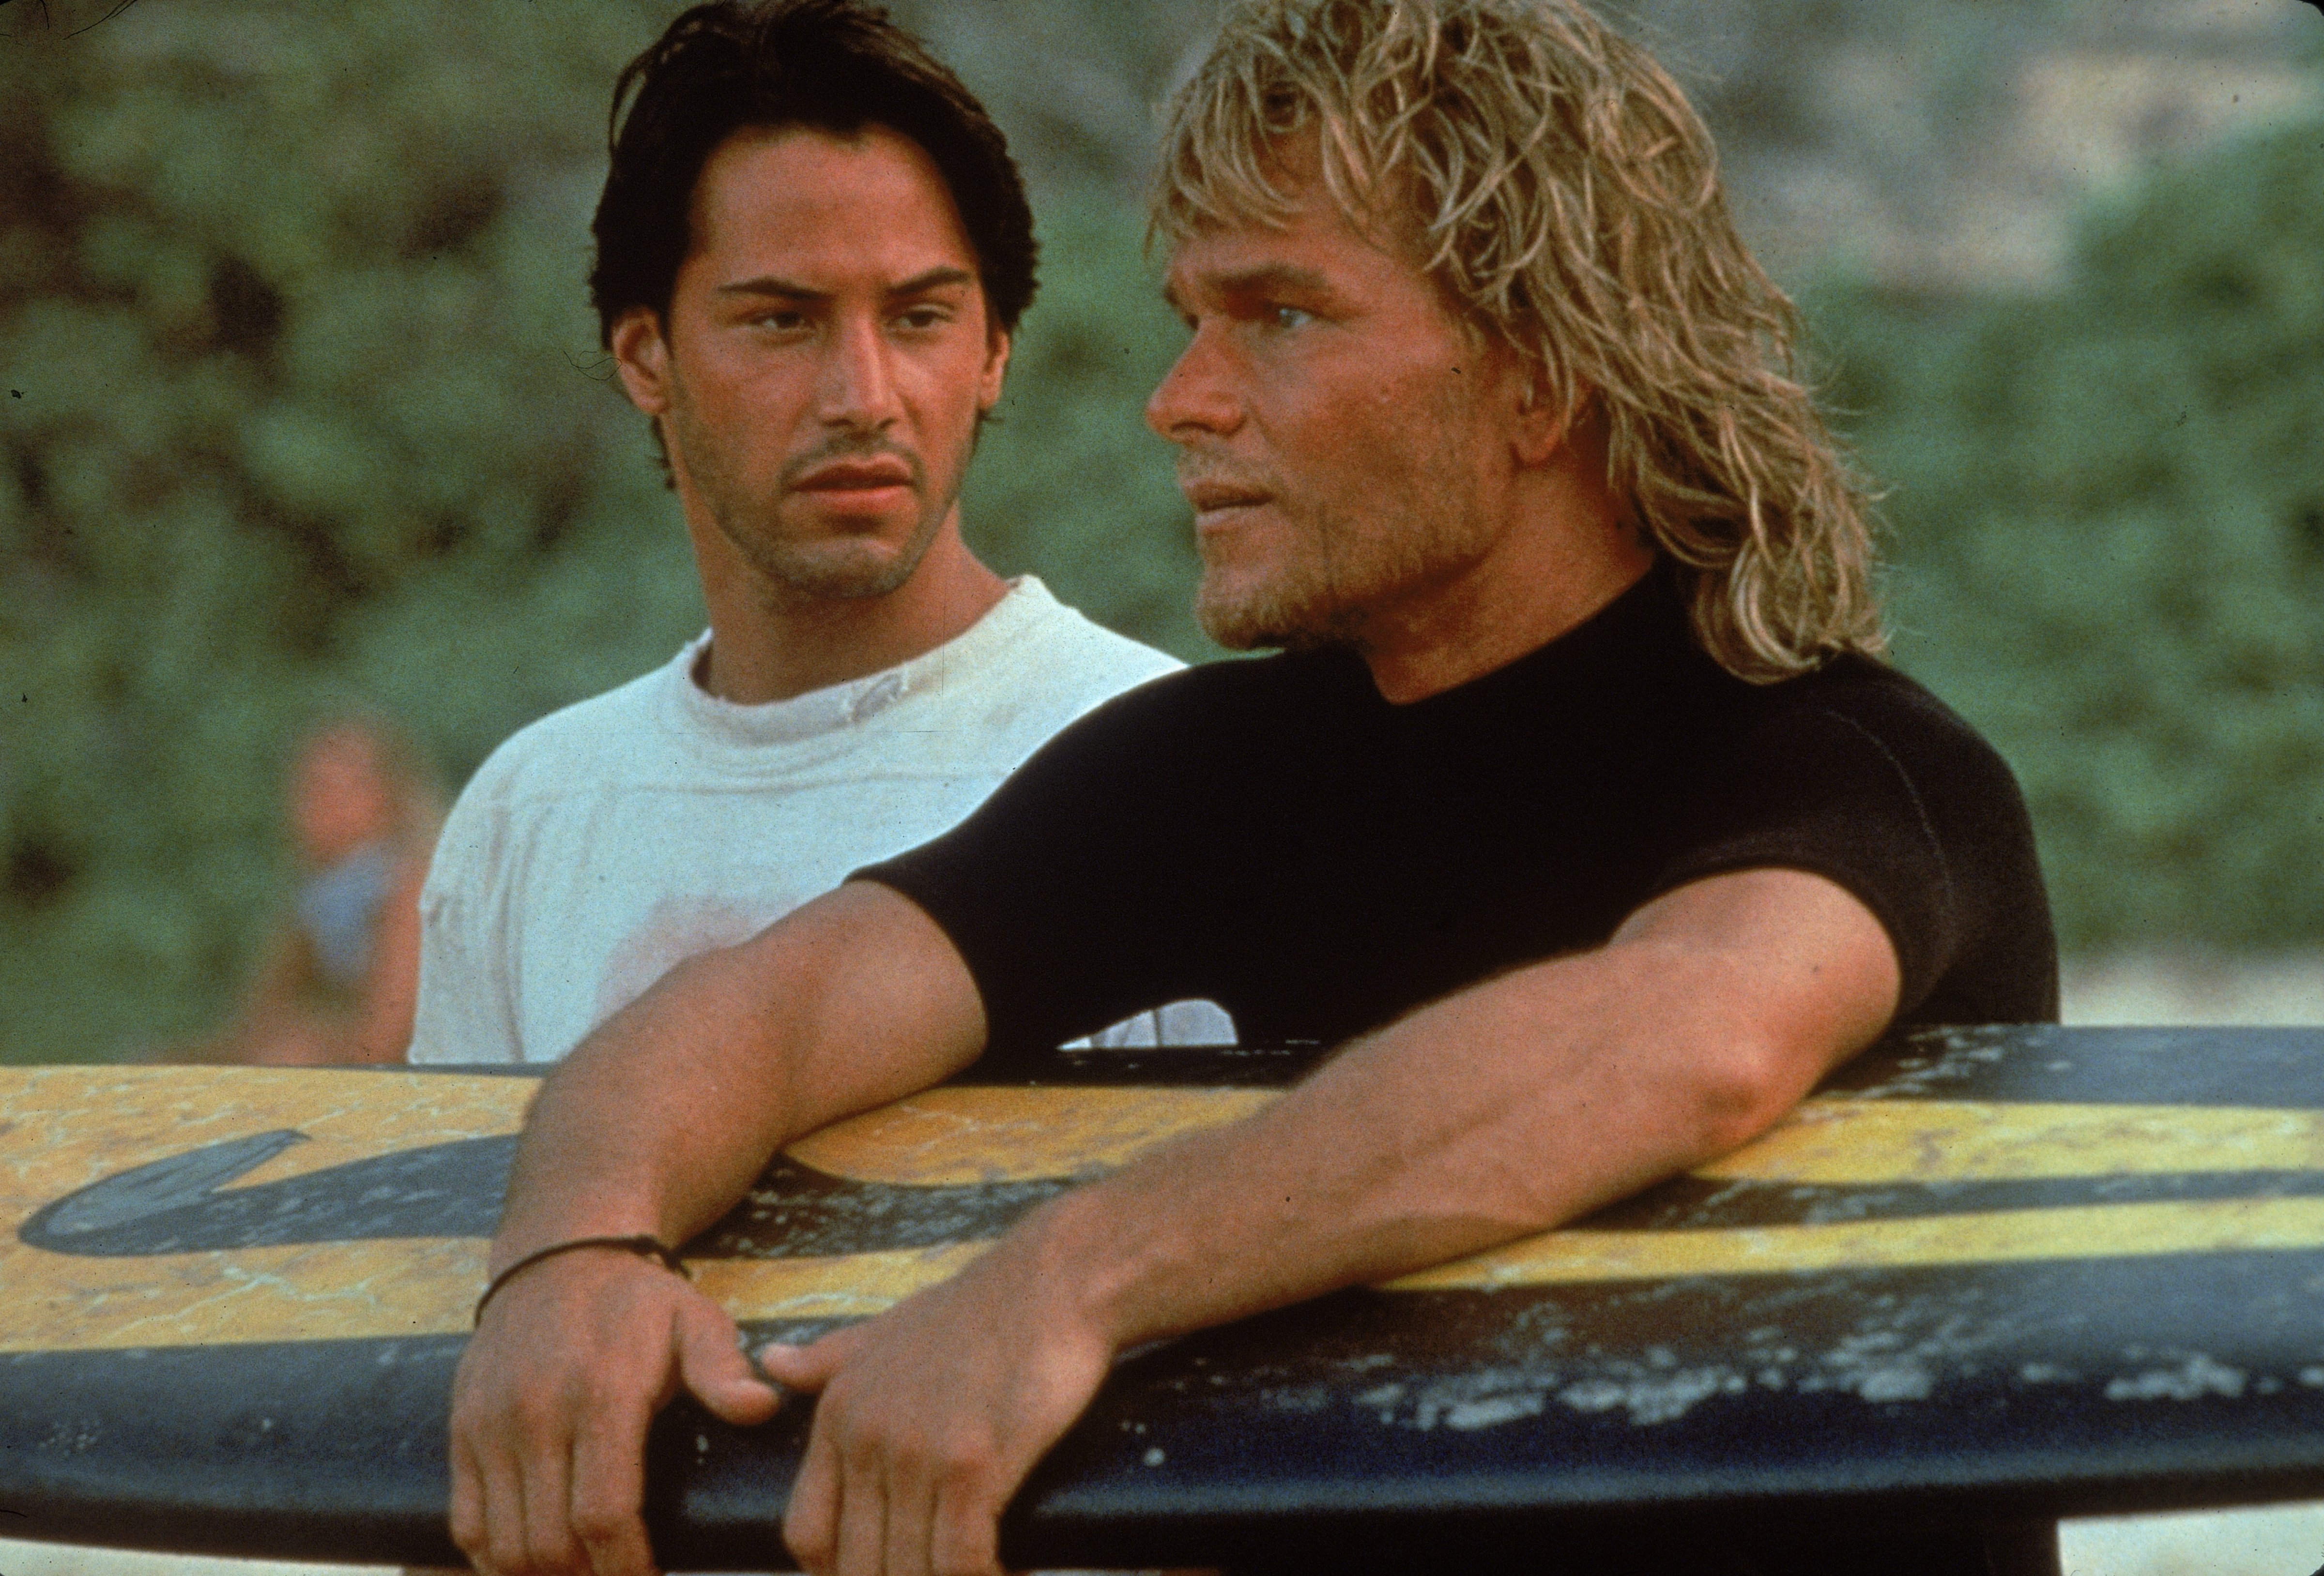 Lebanese-born American actor Keanu Reeves and American actor Patrick Swayze stand on a beach as Swayze holds a surfboard during the filming of the action movie <i>Point Break</i> directed by Kathryn Bigelow, 1991. (Richard Foreman/Fotos International—Getty Images)